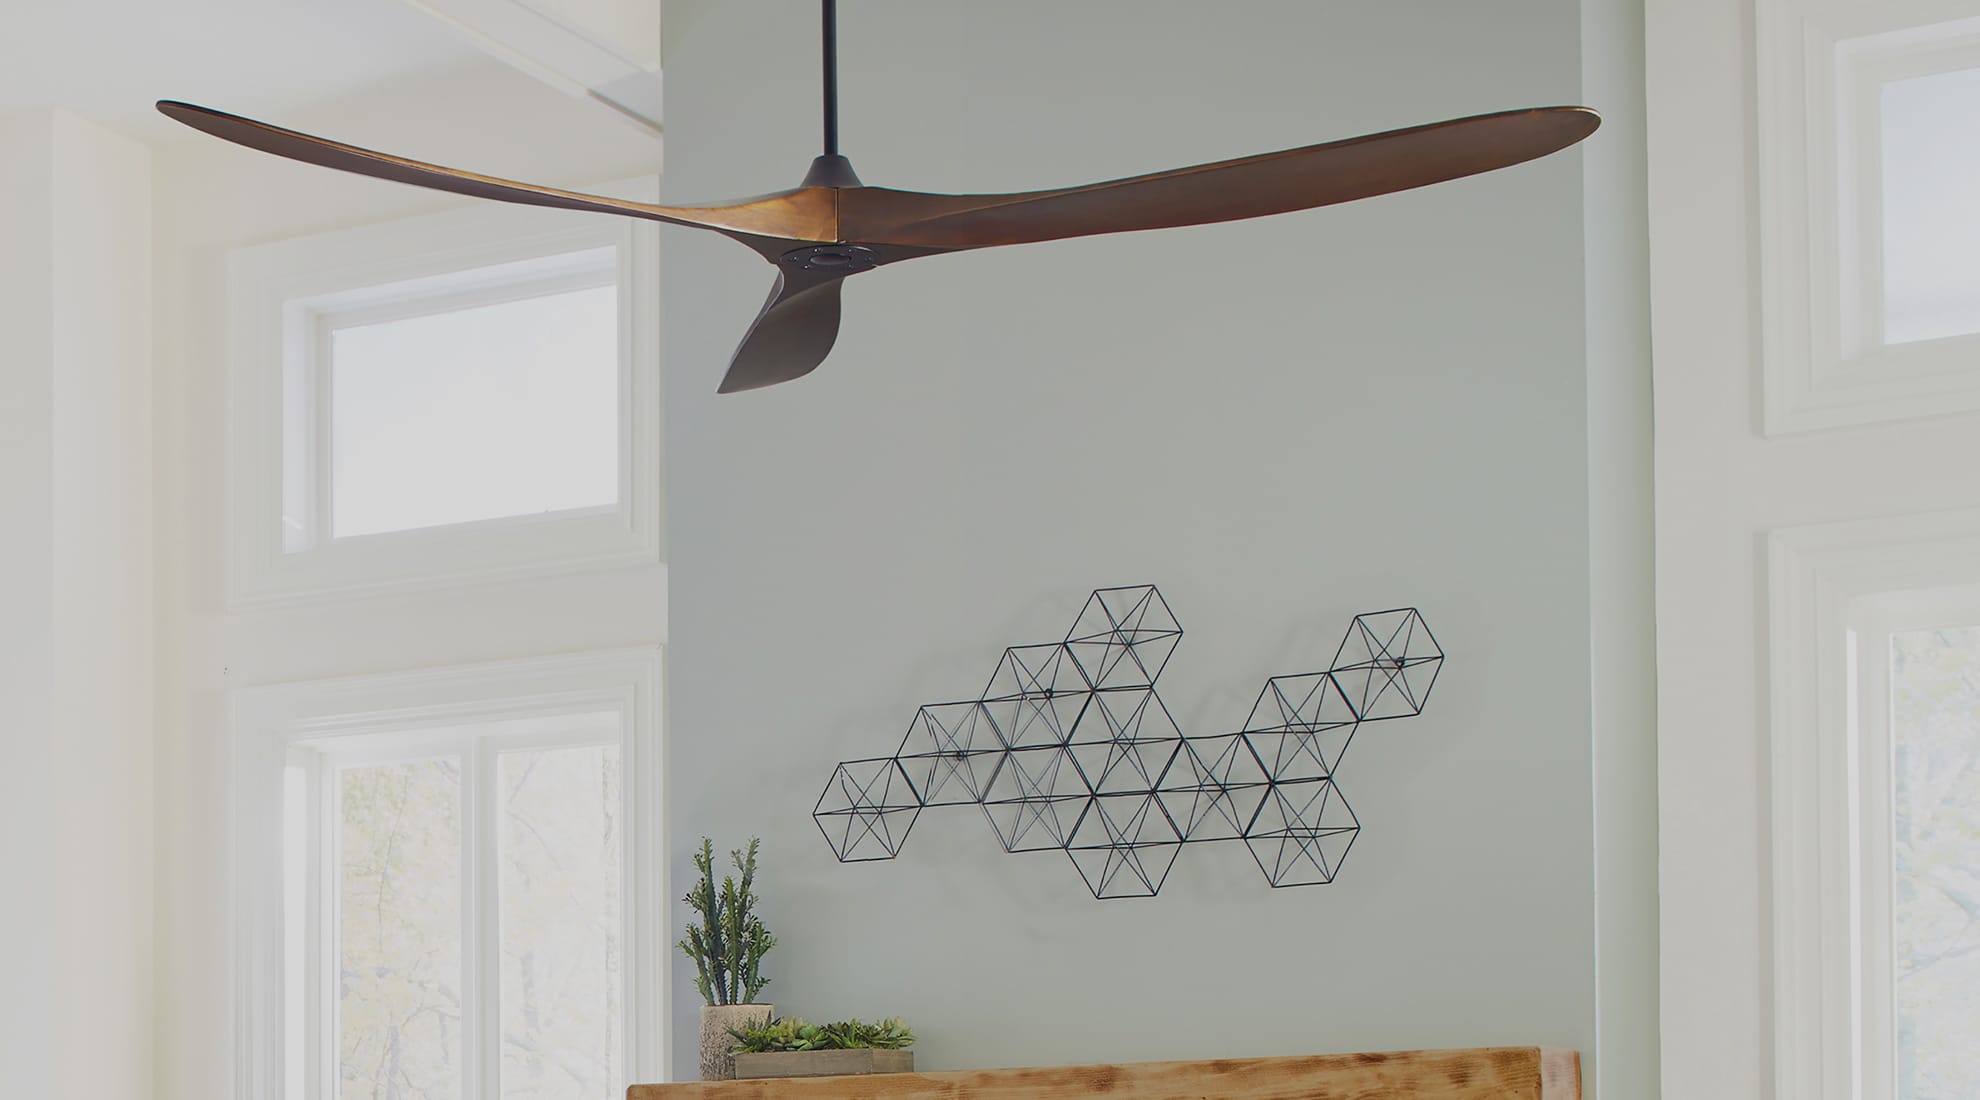 Ceiling Fan Sizes Size, How Do You Size A Ceiling Fan For Room